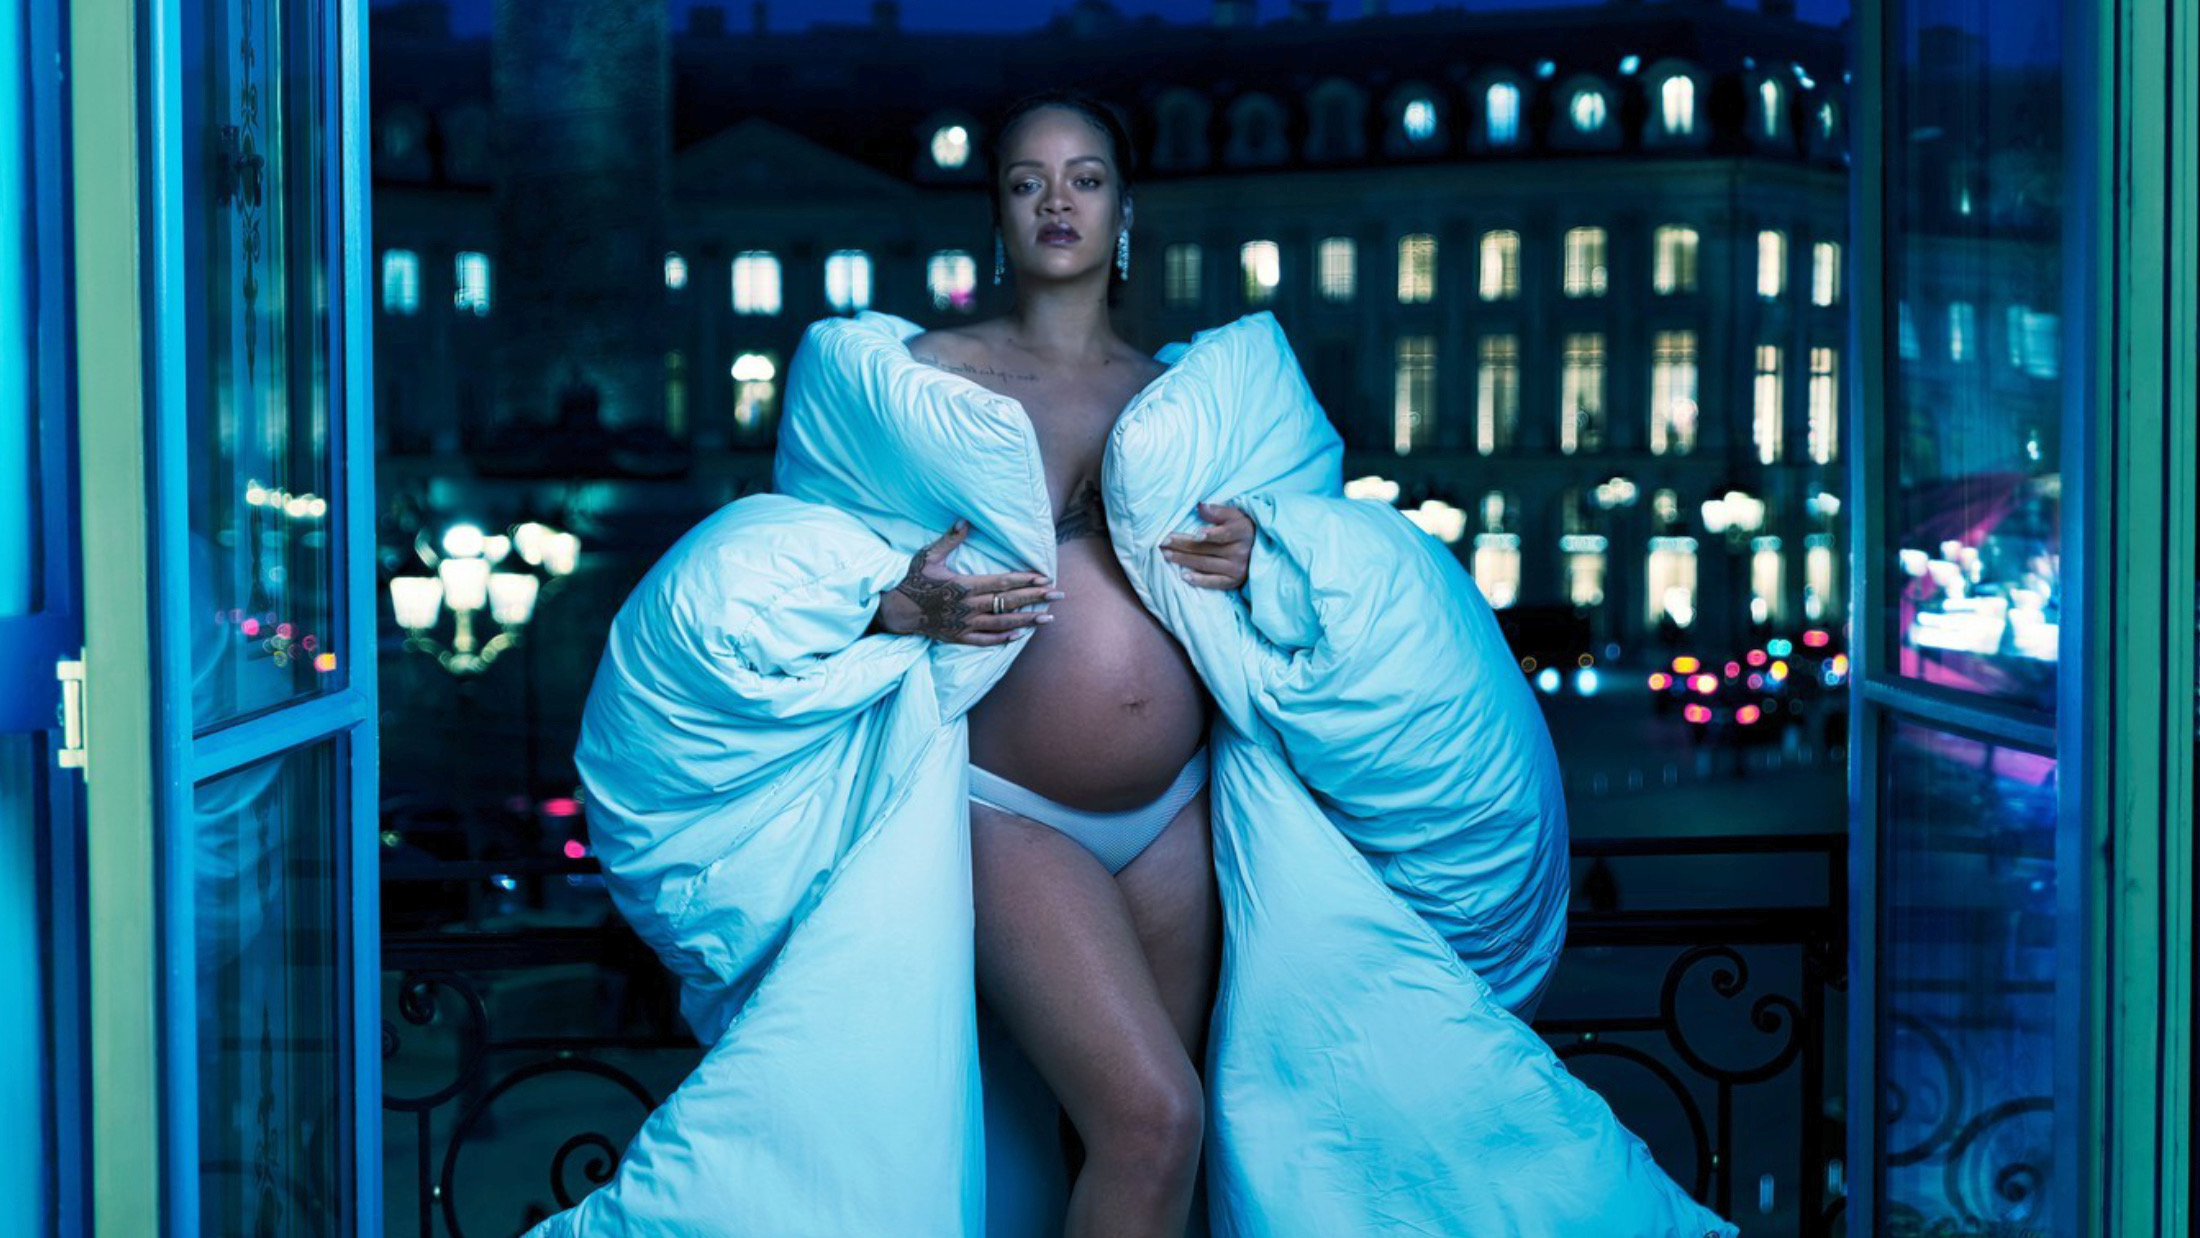 10 Things You Didn't Know About Rihanna's Surprise Baby